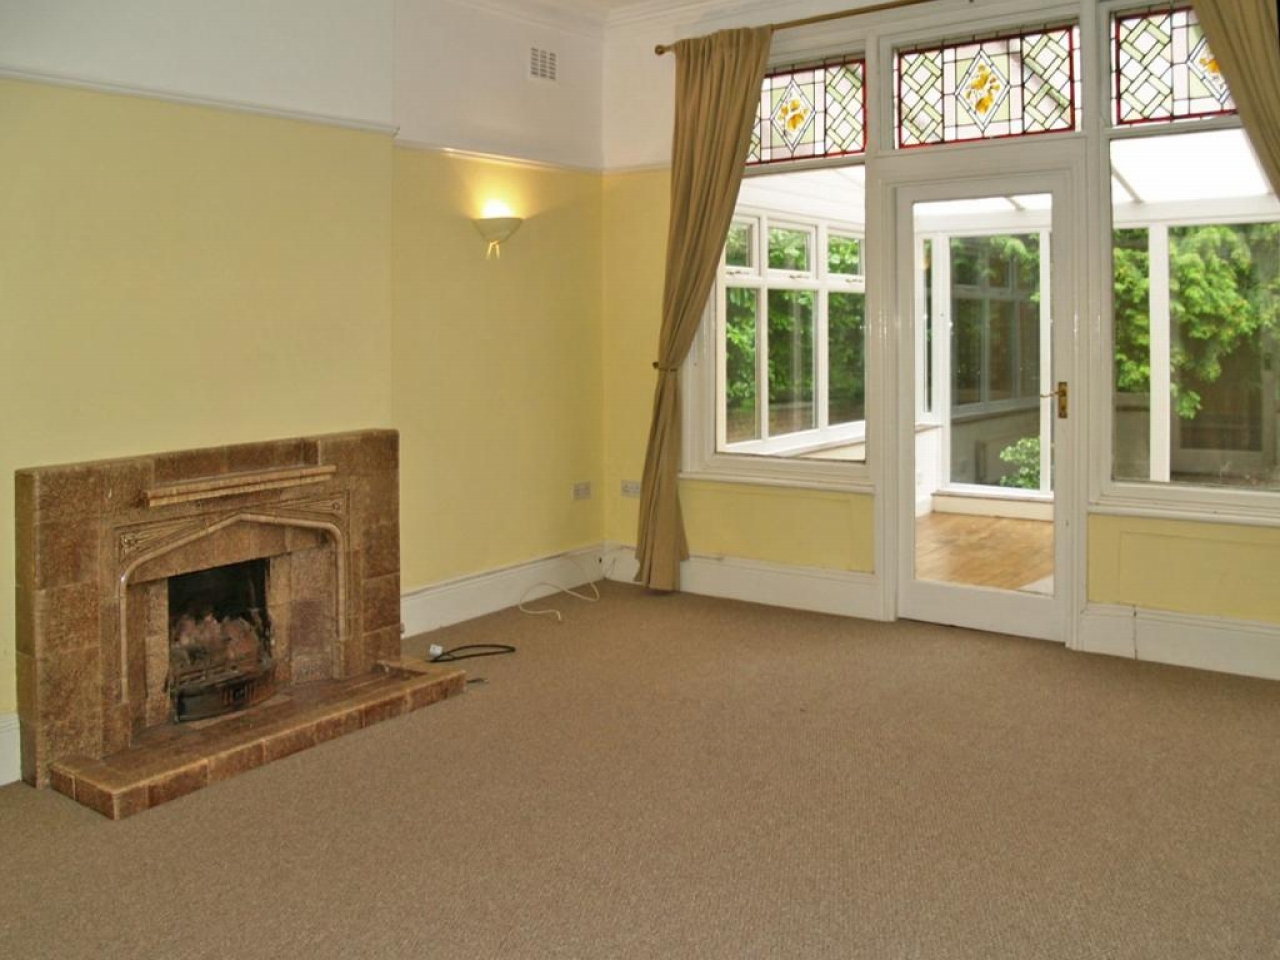 5 bedroom detached house SSTC in Solihull - photograph 5.